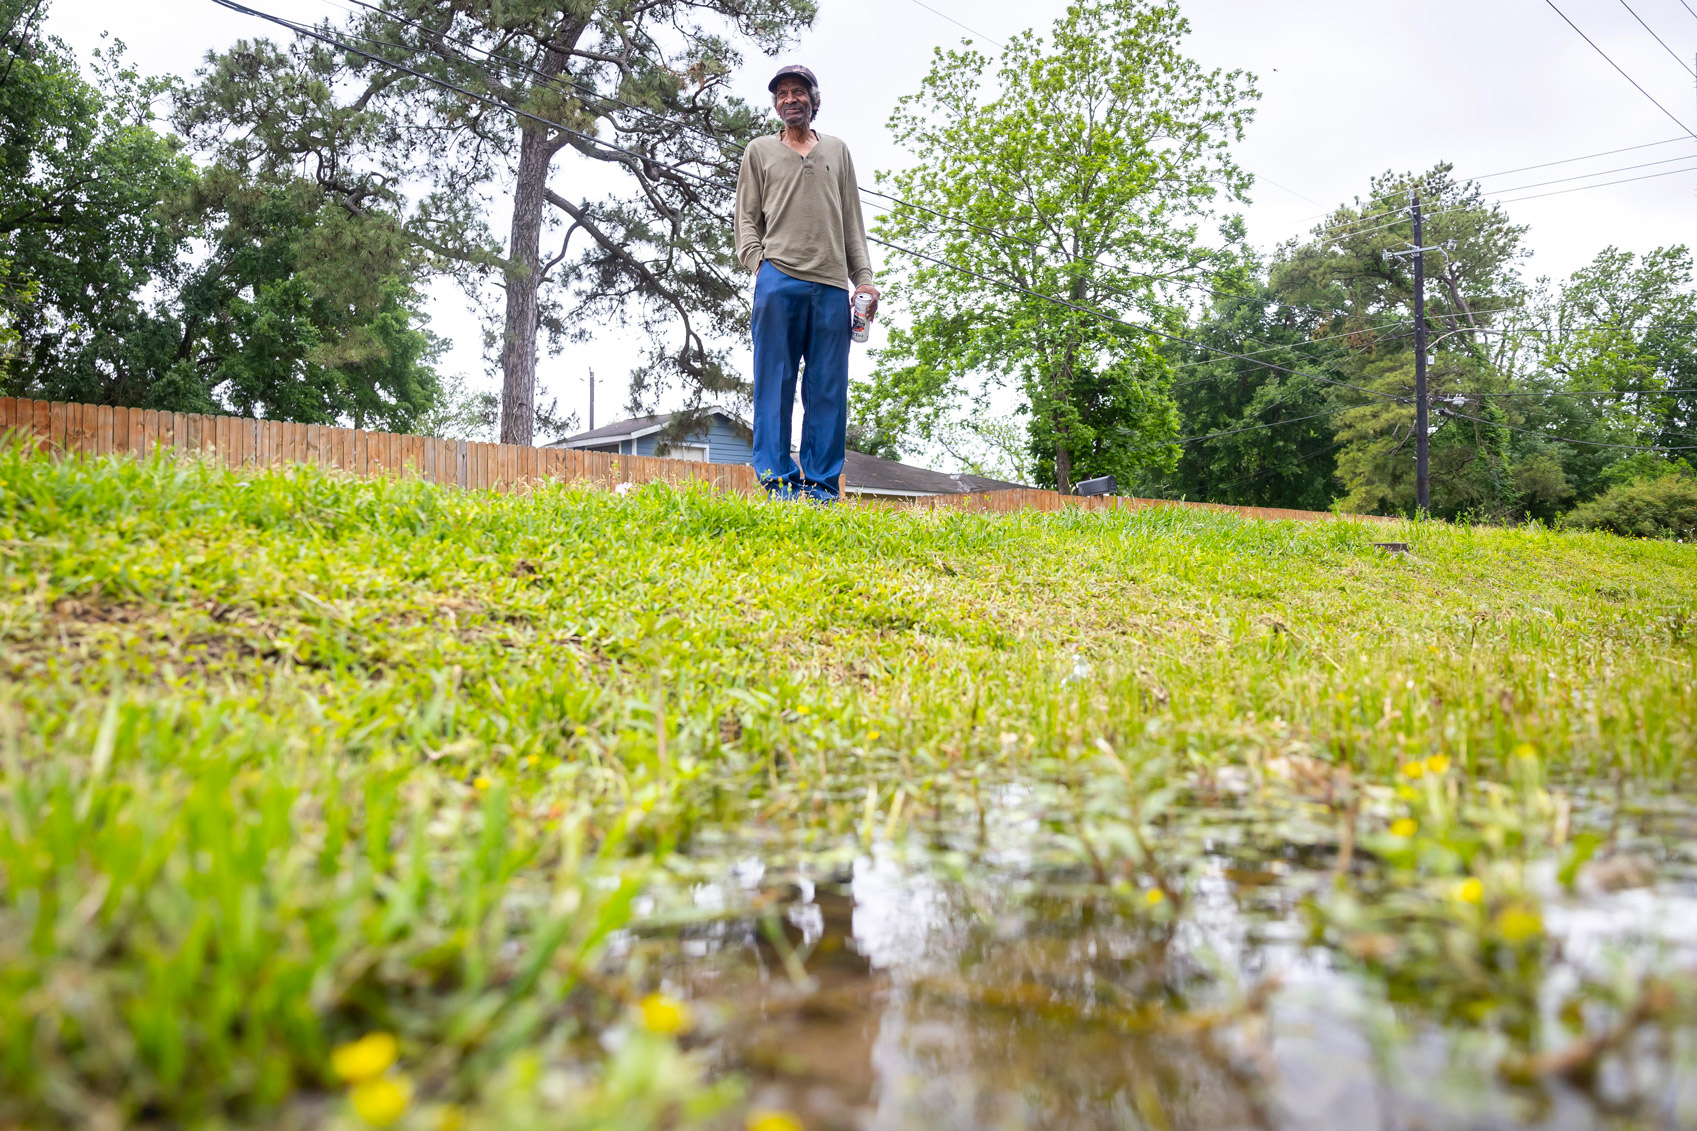 Houston is repairing its aging sewer lines. Some residents say it’s not enough